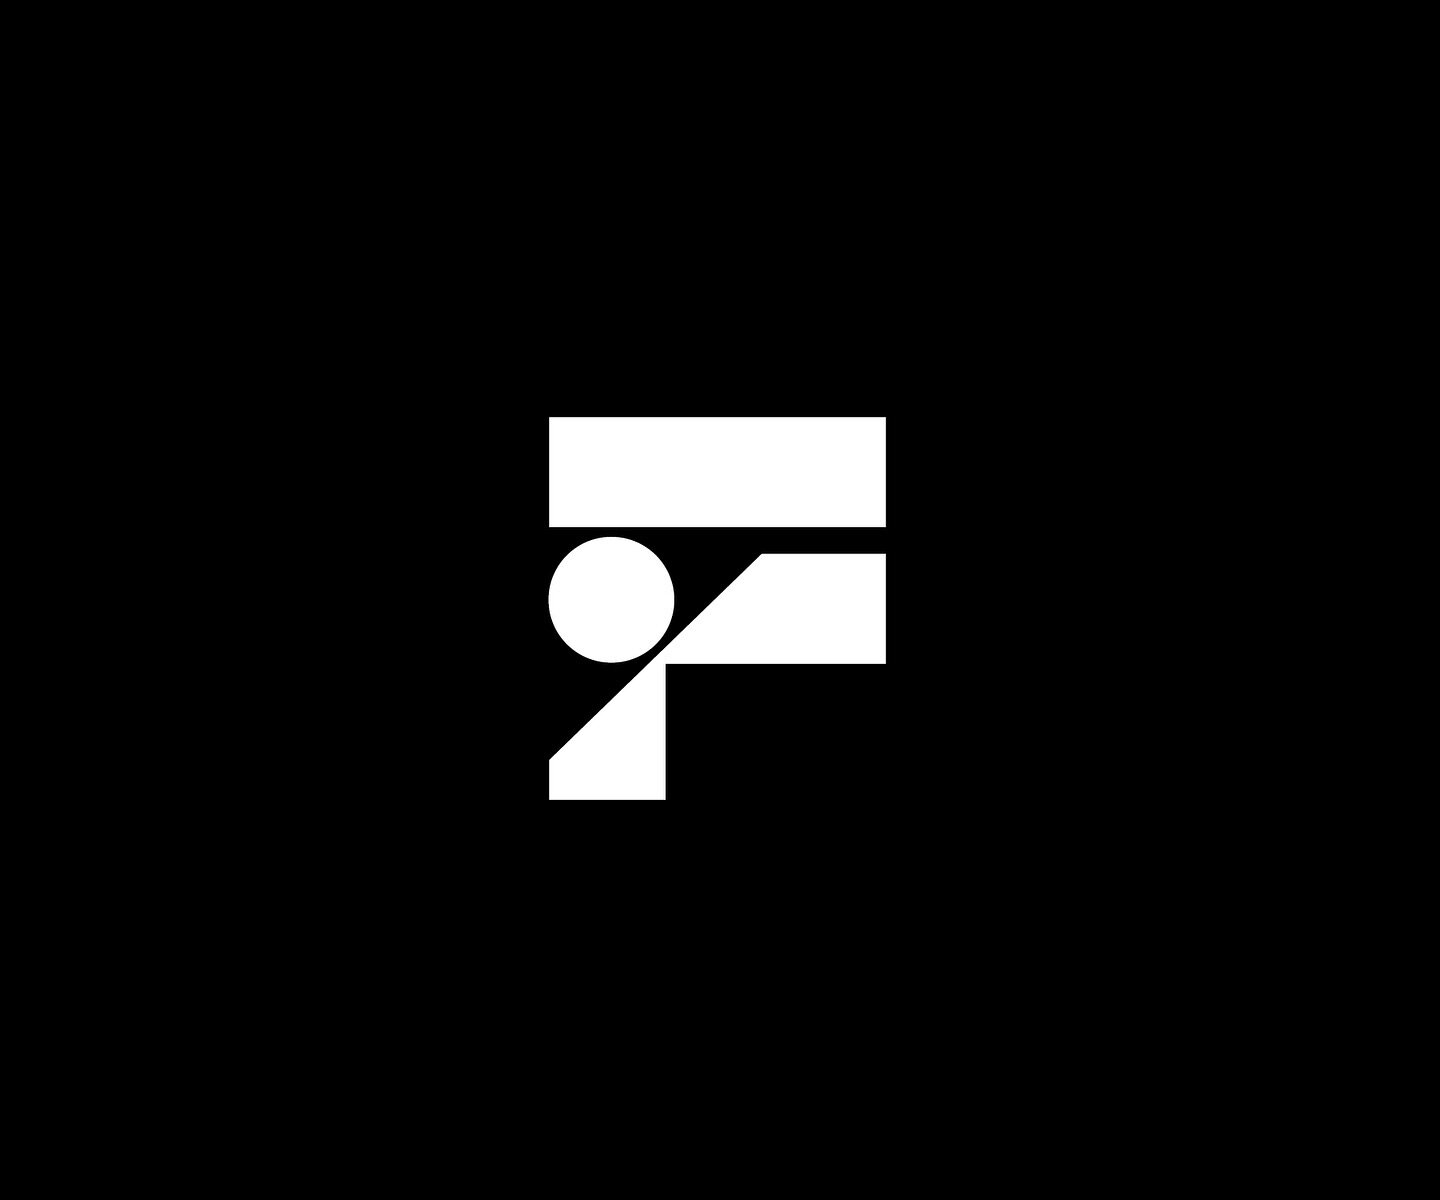 Back at it with some &lsquo;cutting room floor Friday&rsquo; snippets, where we&rsquo;ll share some designs that never made it out of the studio&hellip;but we still admire&hellip;

This time, a series of &lsquo;F&rsquo; logos for a digital advertisin